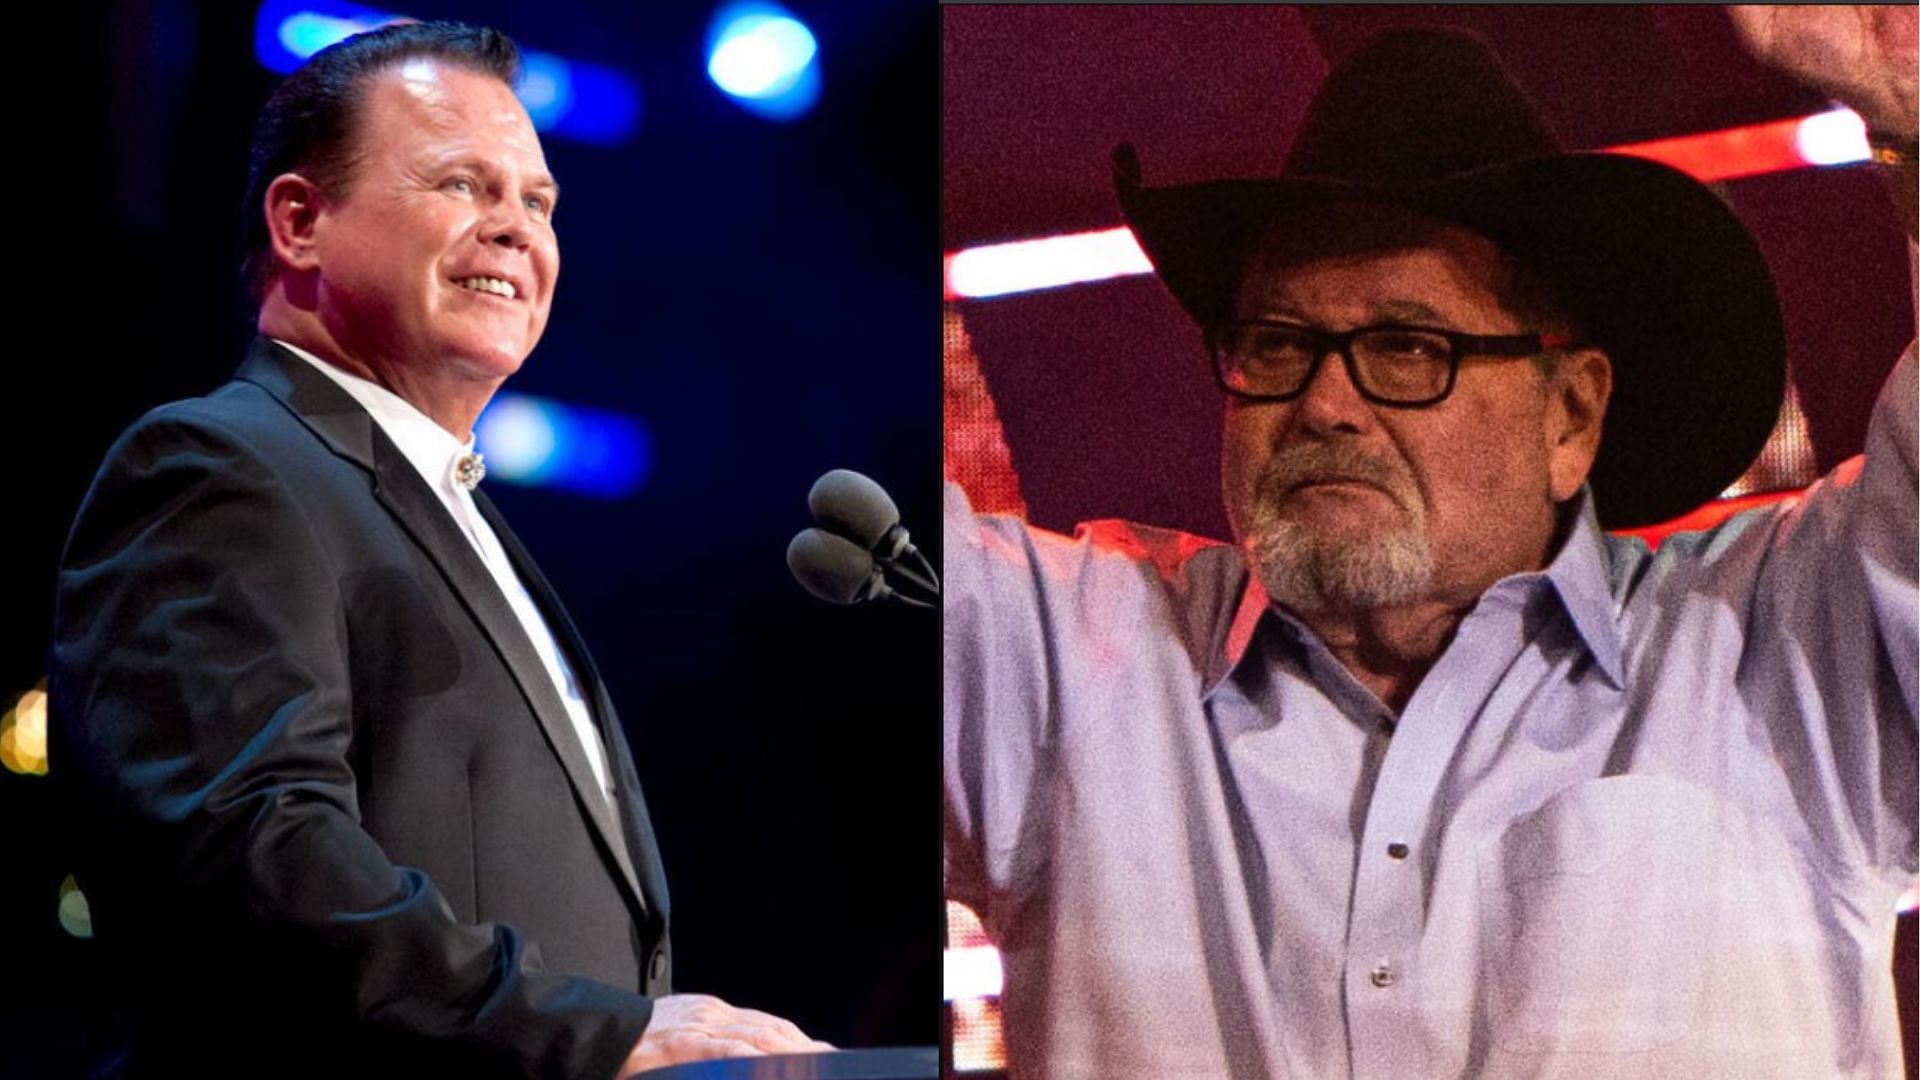 Jim Ross and Jerry Lawler were colleagues in WWE [Image Credits: WWE